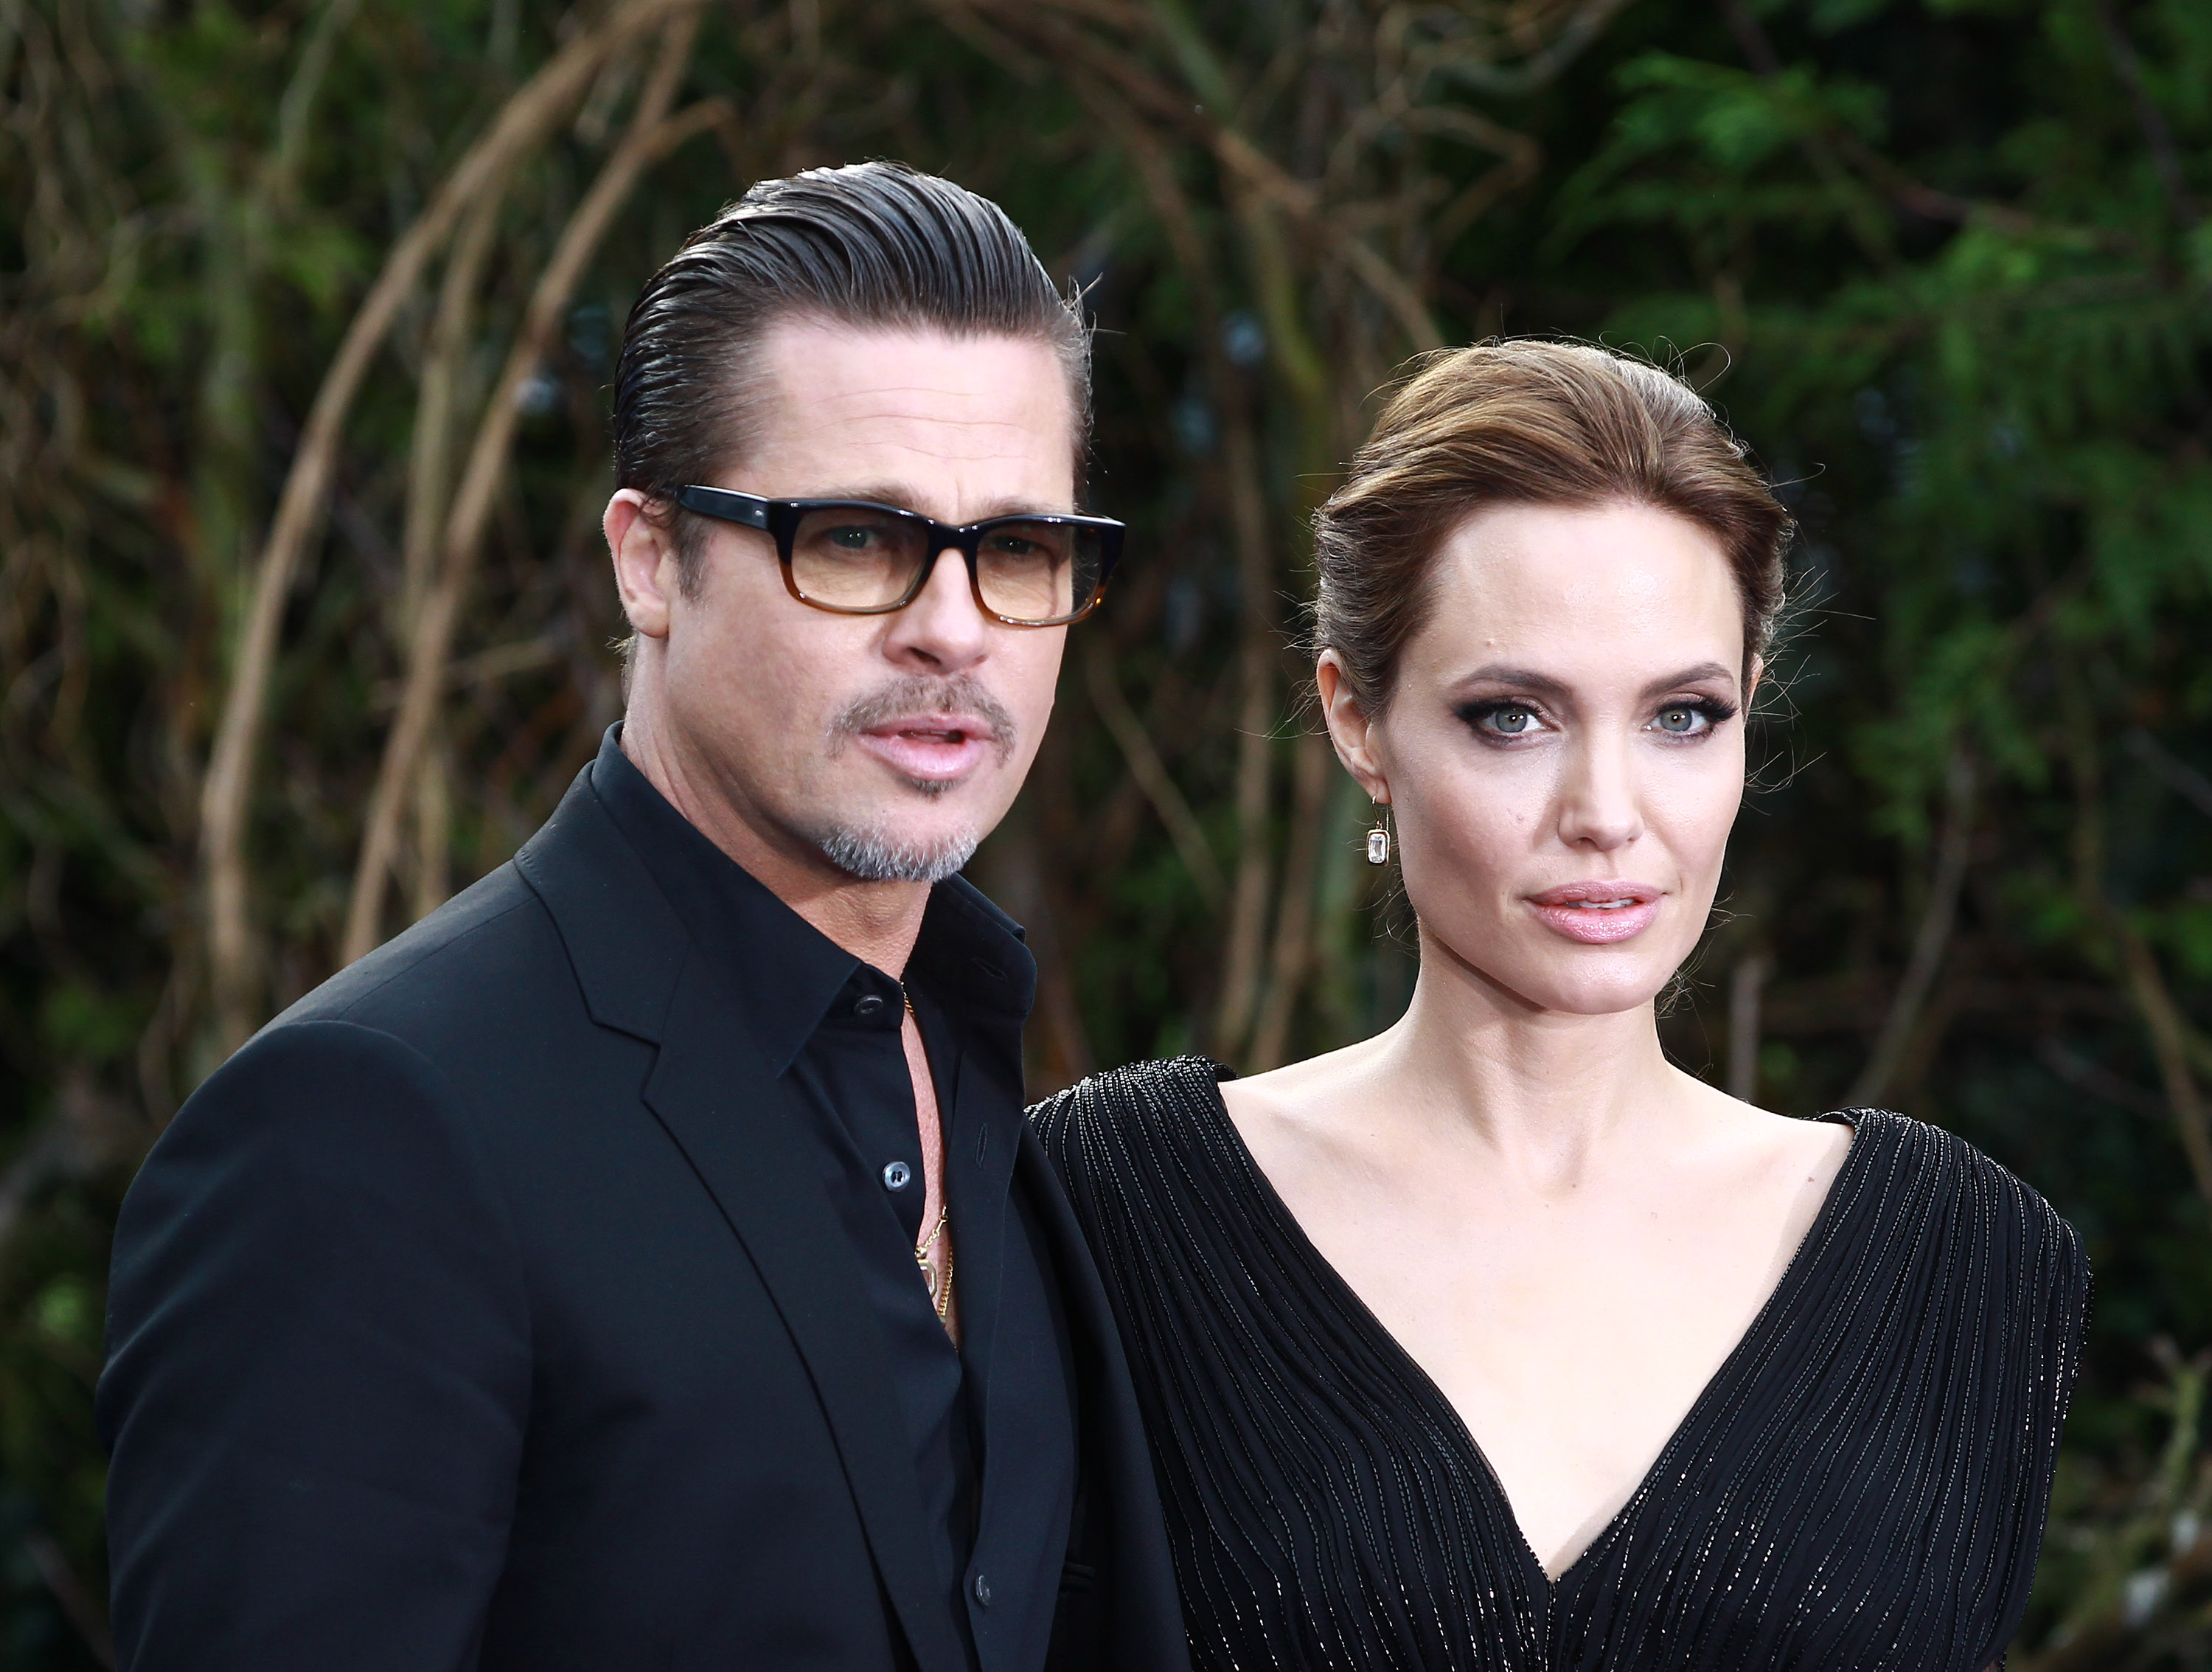 Brad Pitt and Angelina Jolie attends a private reception as costumes and props from Disney's "Maleficent" are exhibited in support of Great Ormond Street Hospital at Kensington Palace on May 8, 2014 in London. (Fred Duval—FilmMagic)